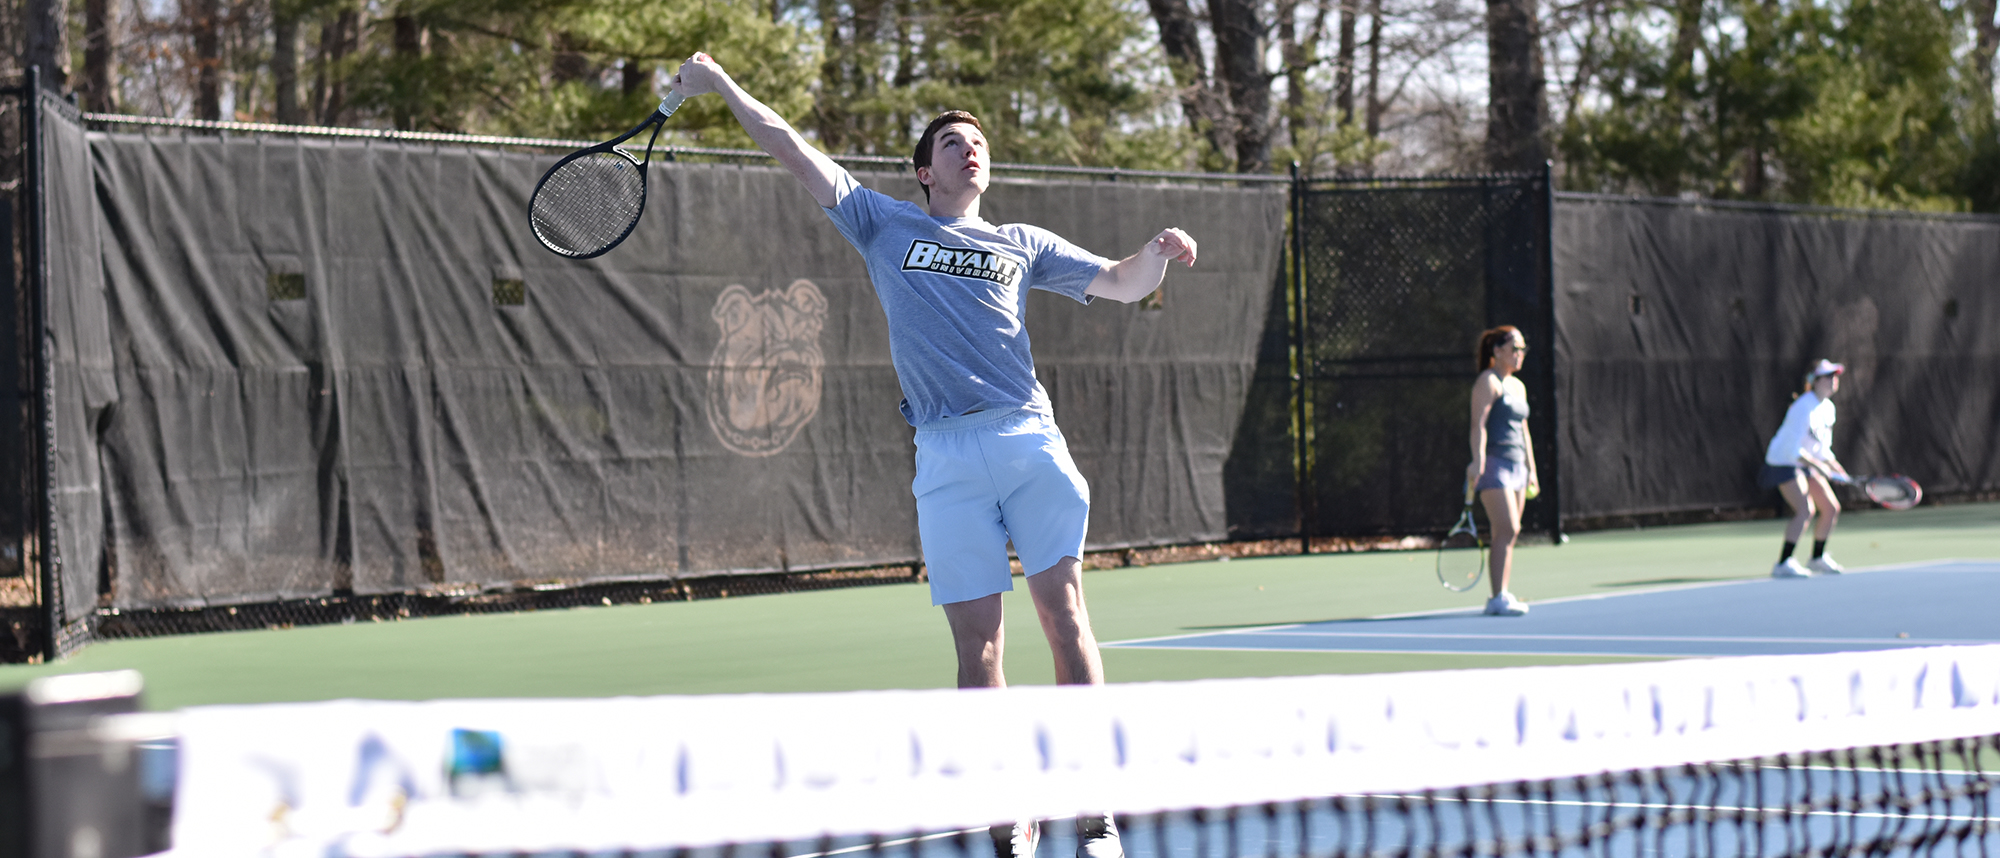 TOUGH FIGHT FOR BRYANT TENNIS